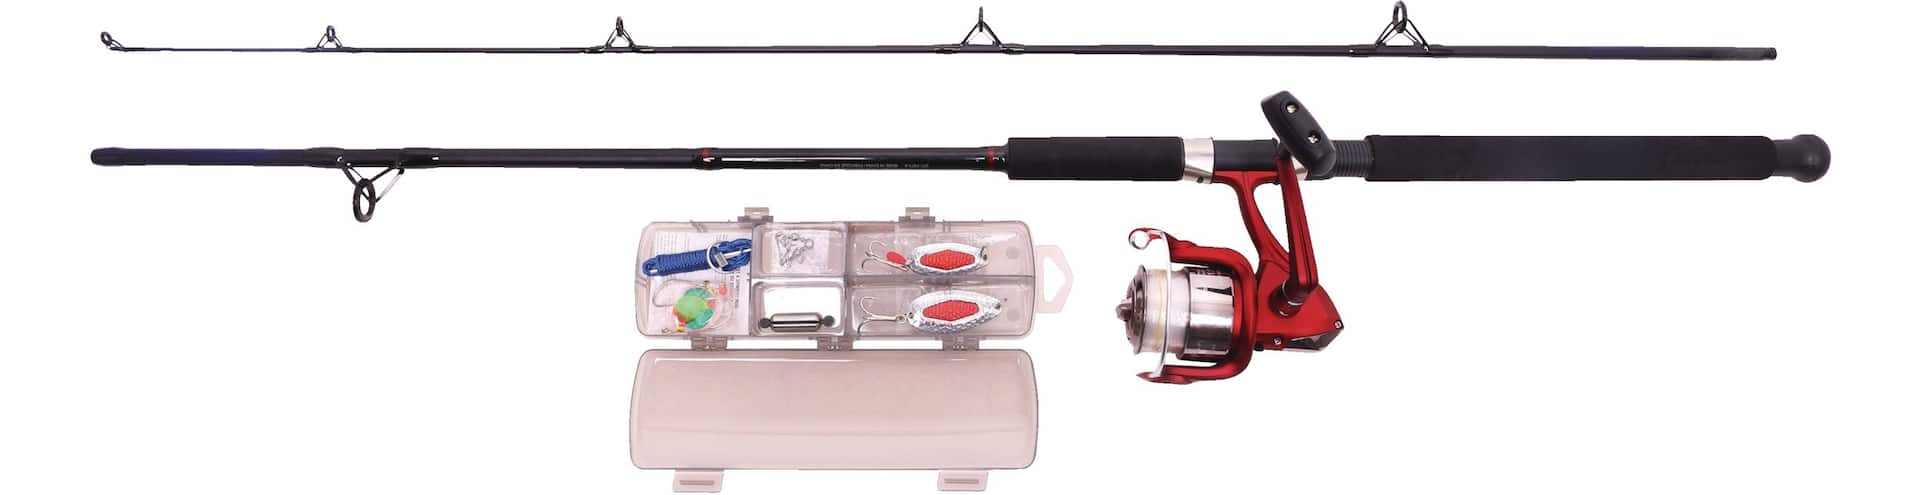 Shakespeare Catch More Fish Bass Spinning Fishing Rod and Reel Combo,  Pre-Spooled, Medium, 6.6-ft, 2-pc